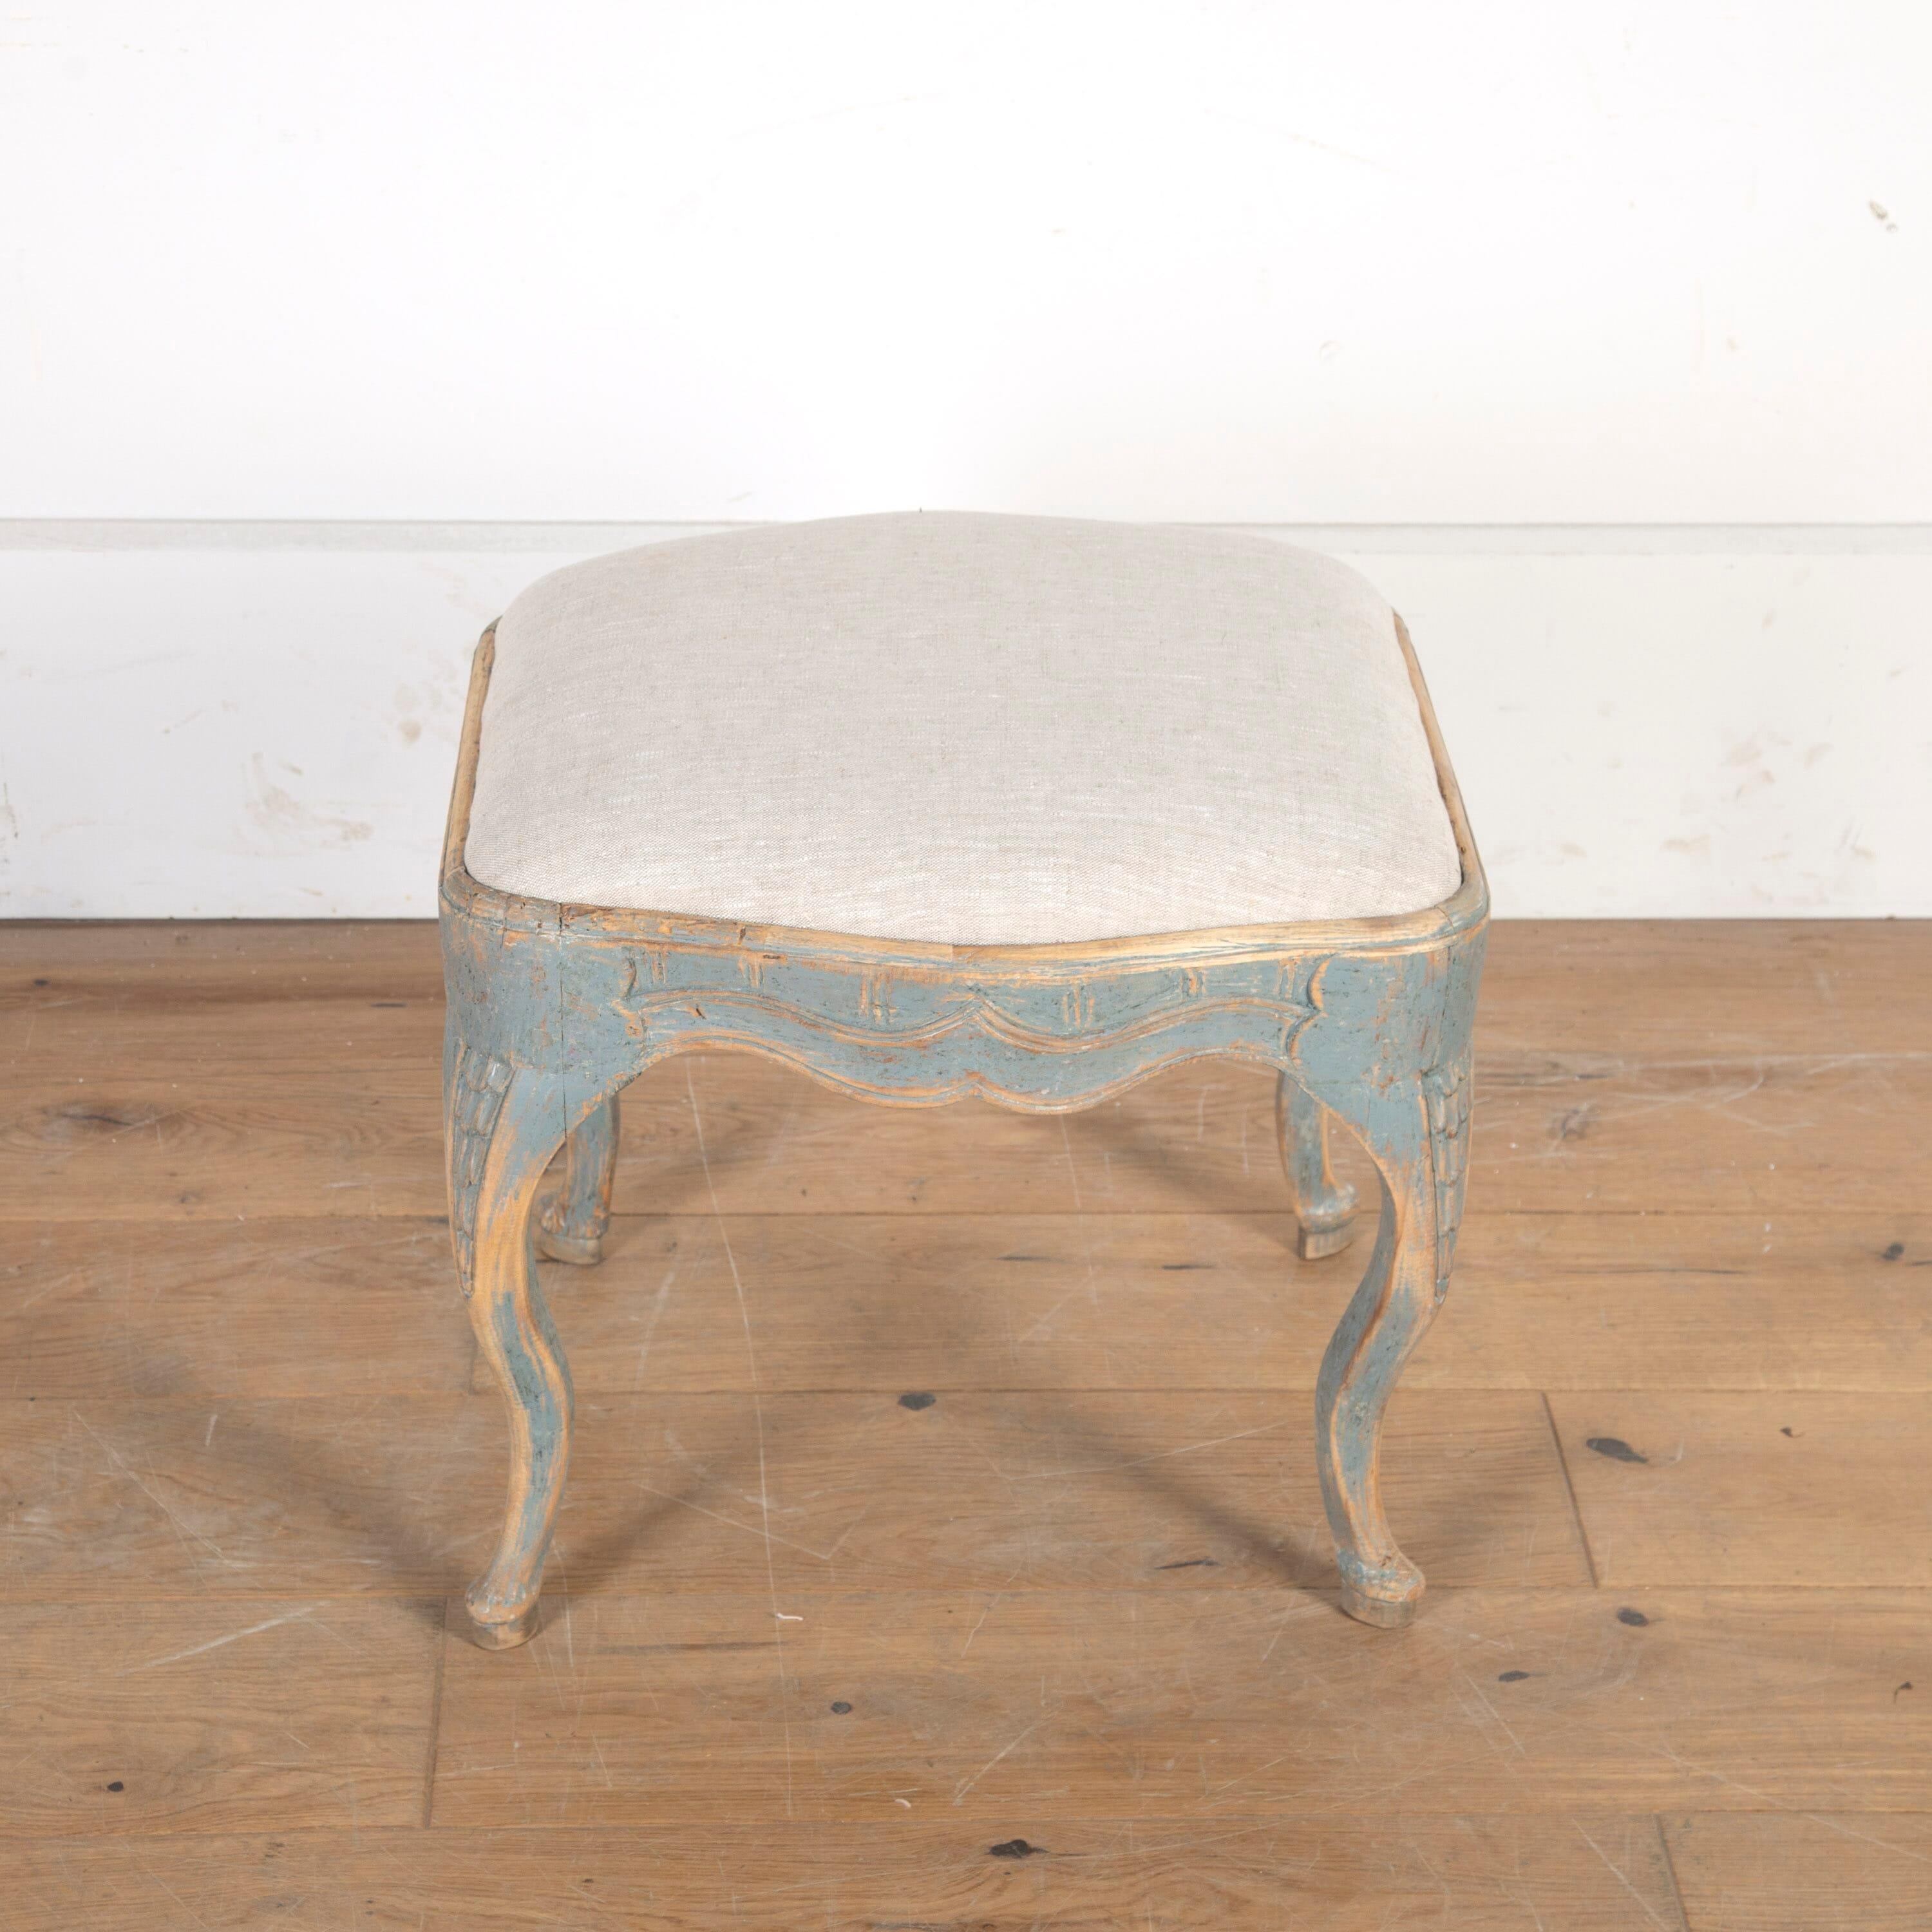 Wonderful Swedish 18th century Stockholm-made footstool.

This pine stool has wonderful rococo curves with a scalloped apron and carved cabriole legs. 

It has been repainted in blue and newly upholstered in linen. 

 